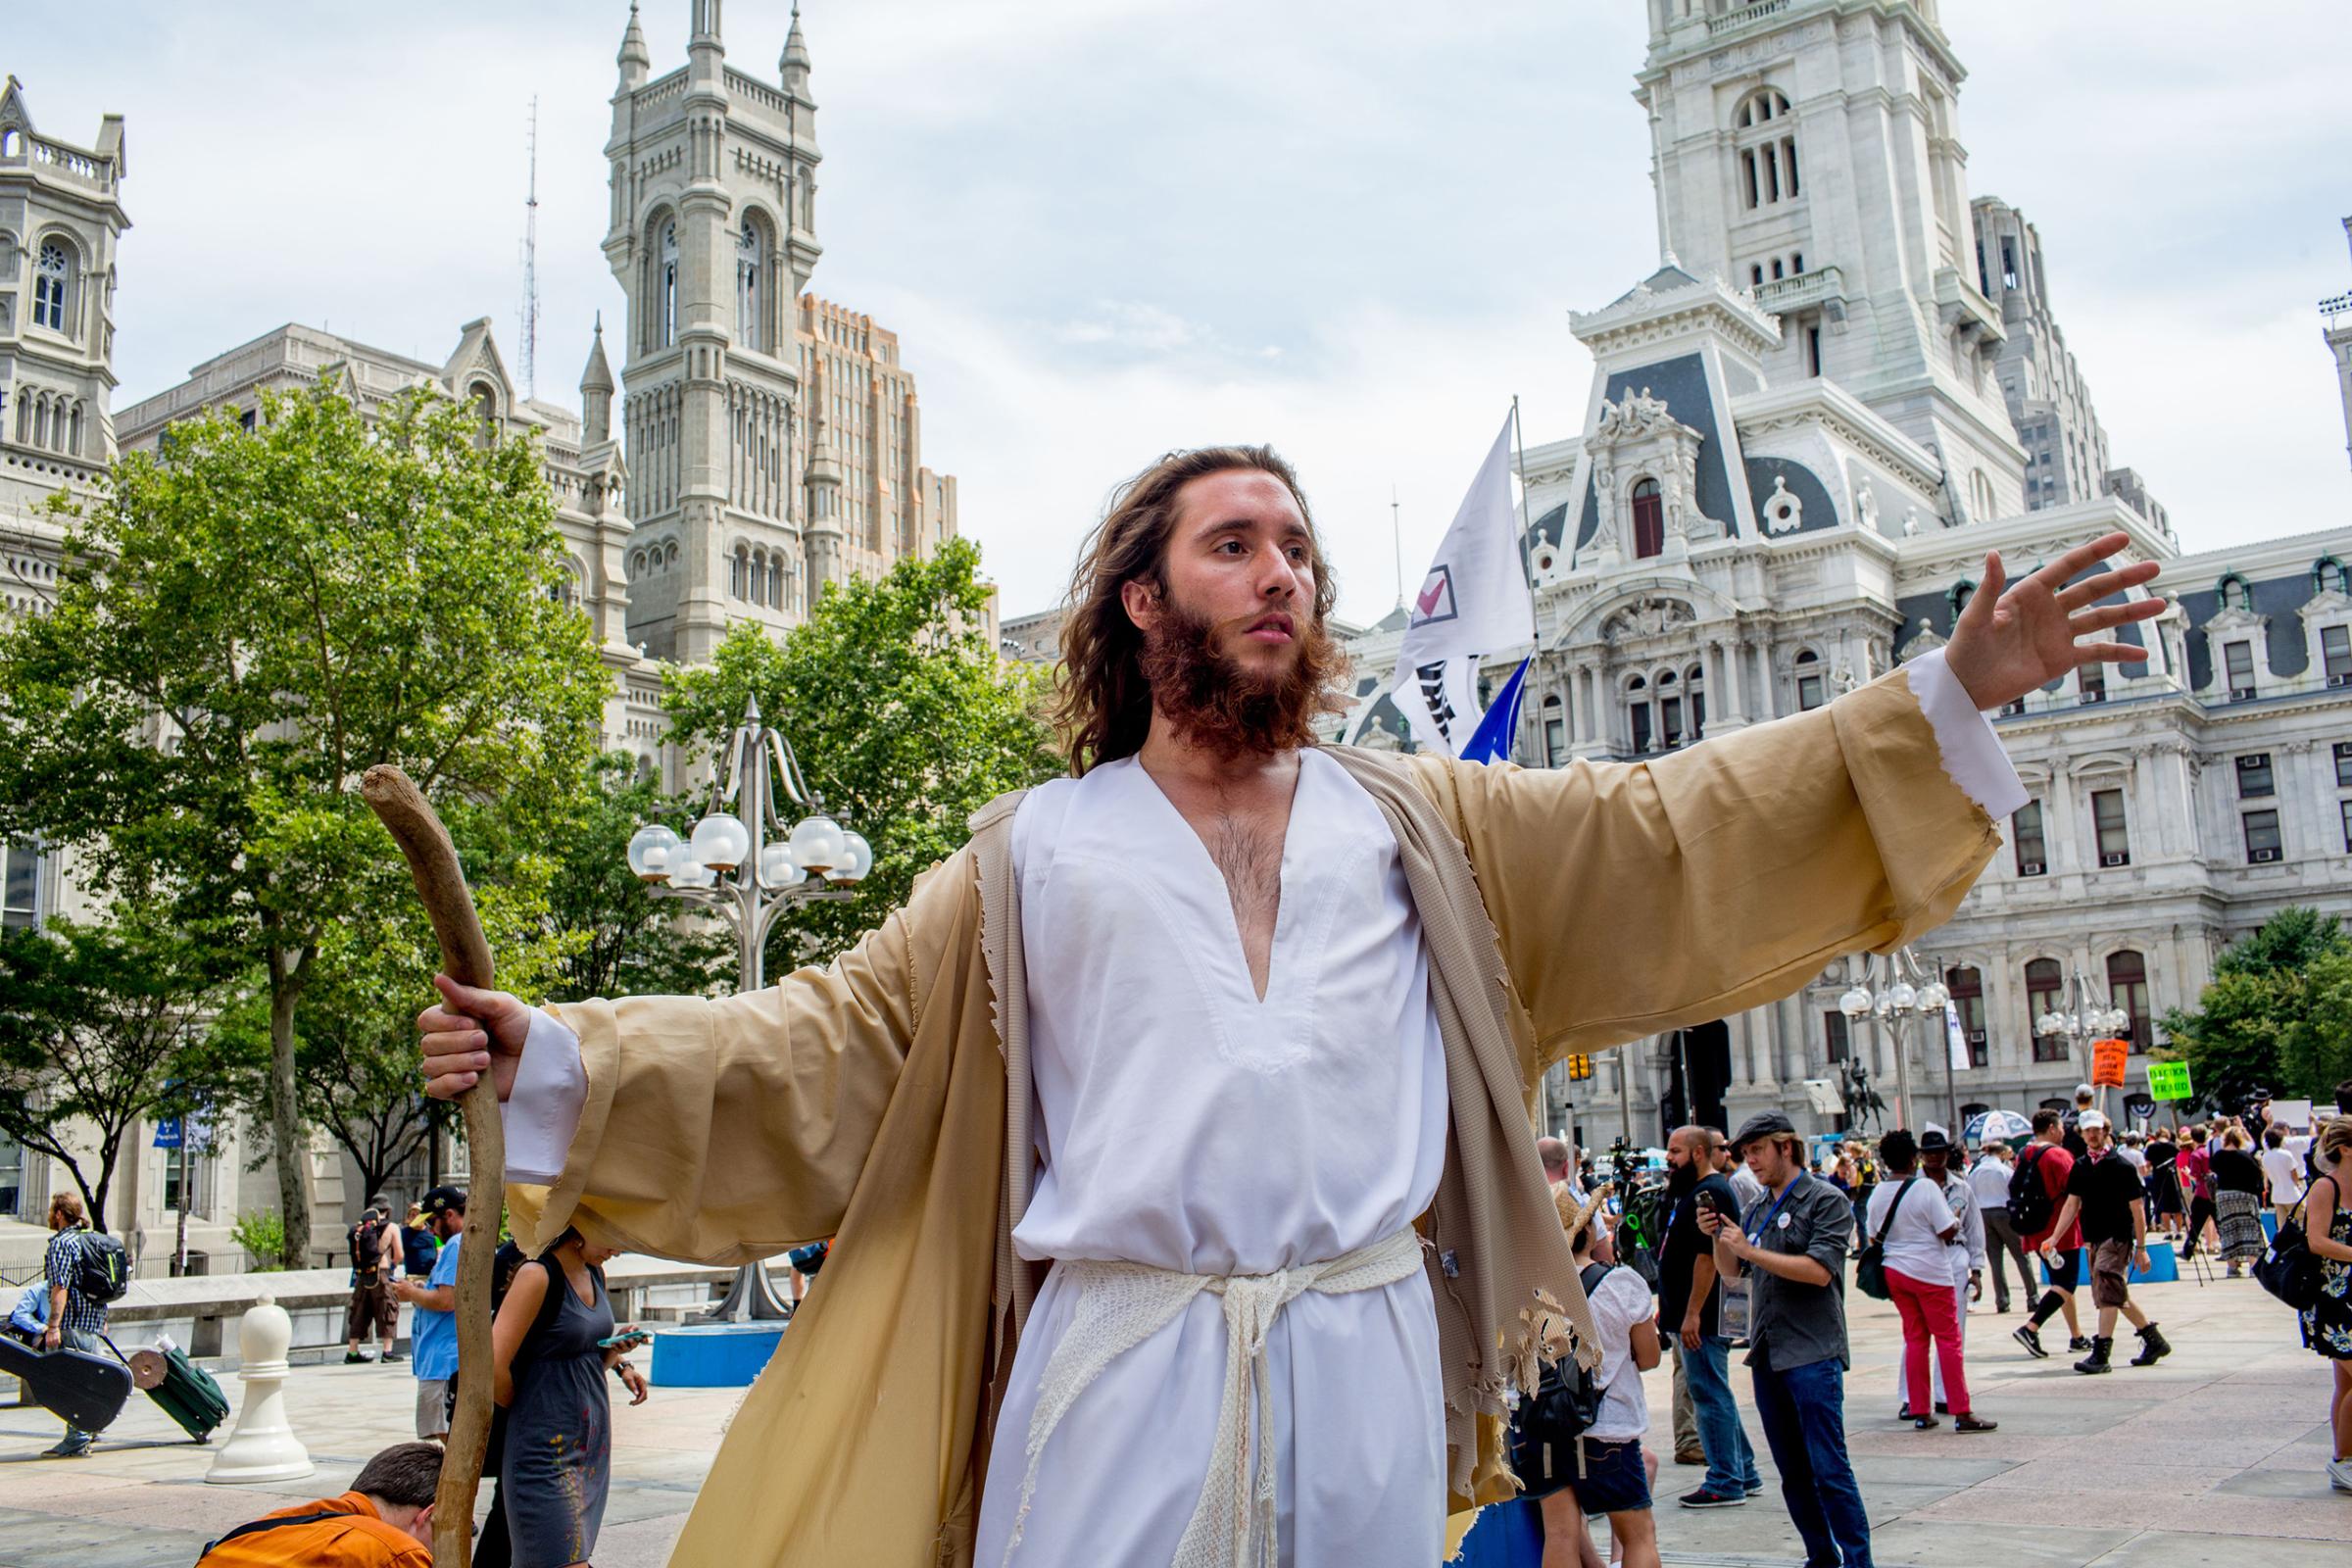 A protestor dressed like Jesus Christ near City Hall in Philadelphia on Tuesday afternoon to protest the Democratic National Convention at the Wells Fargo Center on July 26, 2016.